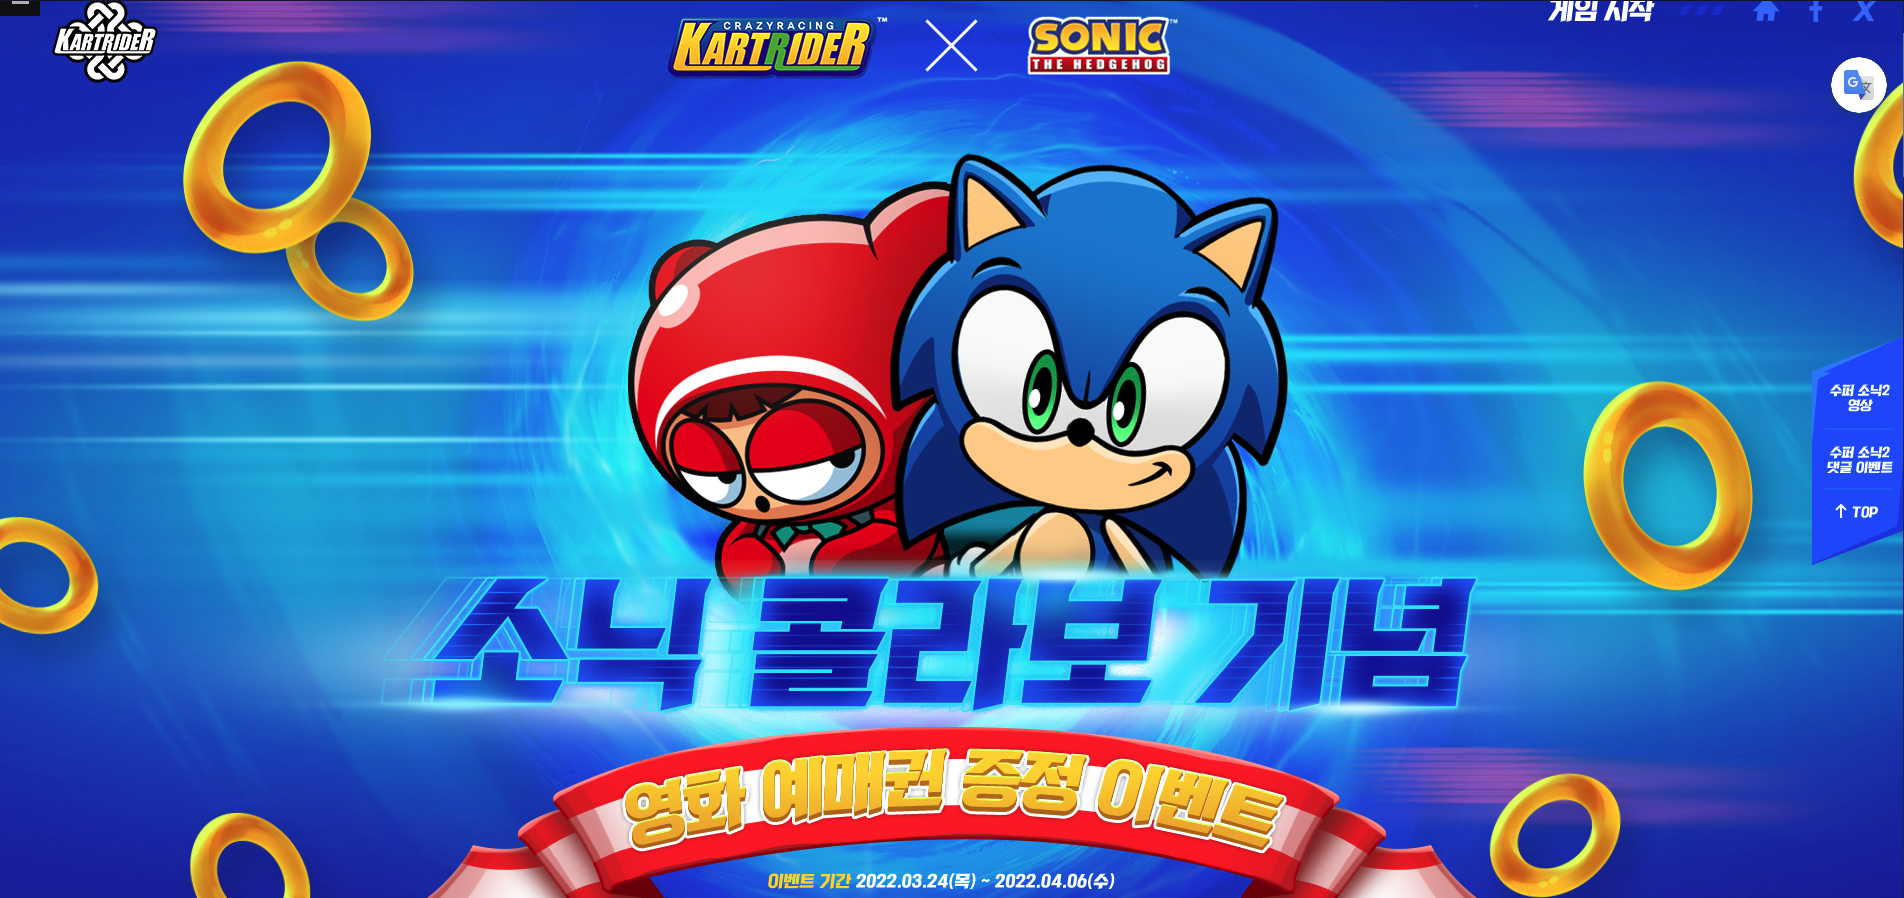 Candy Crush and Sonic come together for a sweet collaboration